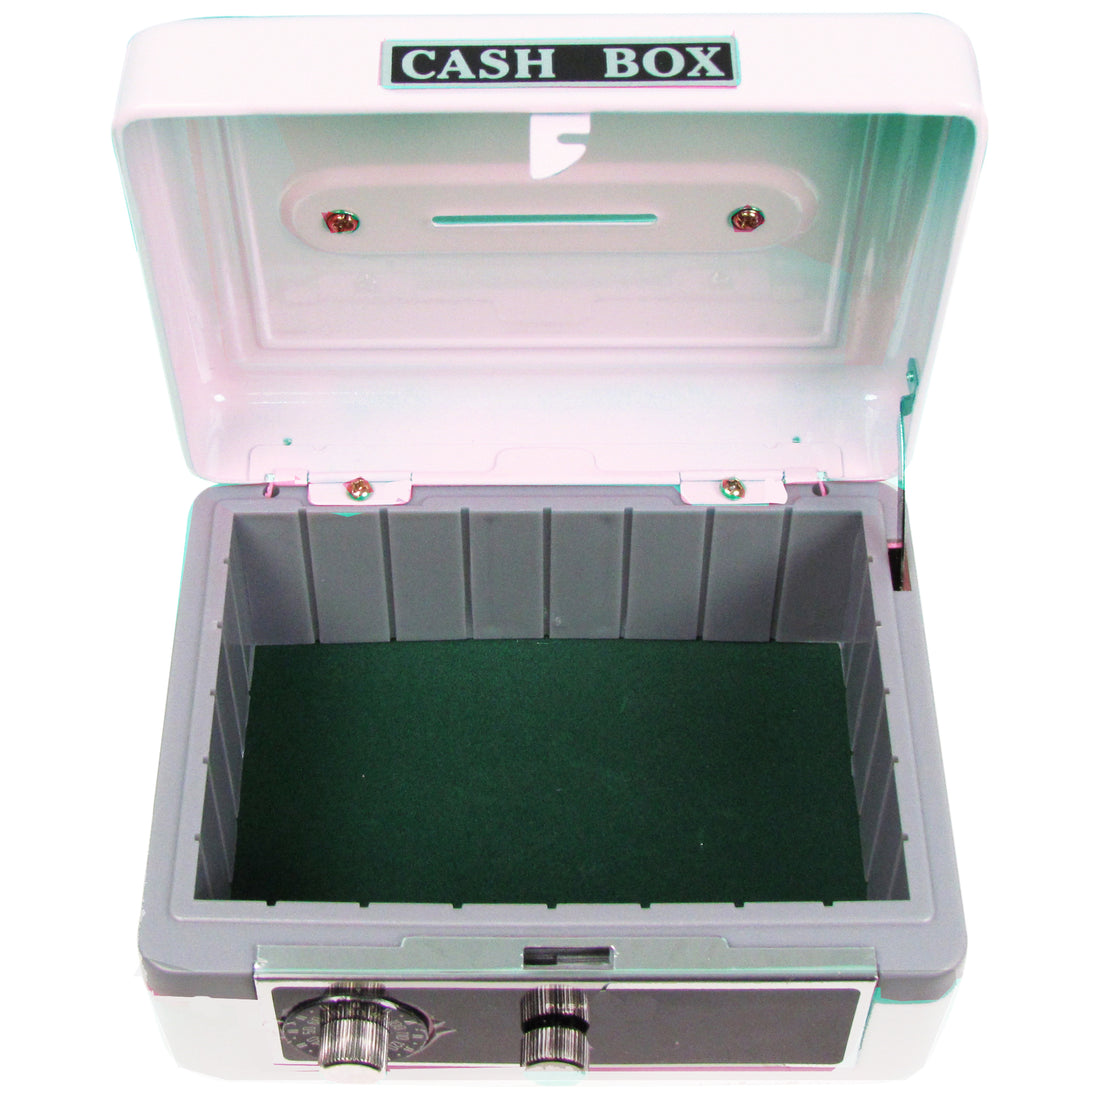 Personalized White Cash Box with Gone Fishing design